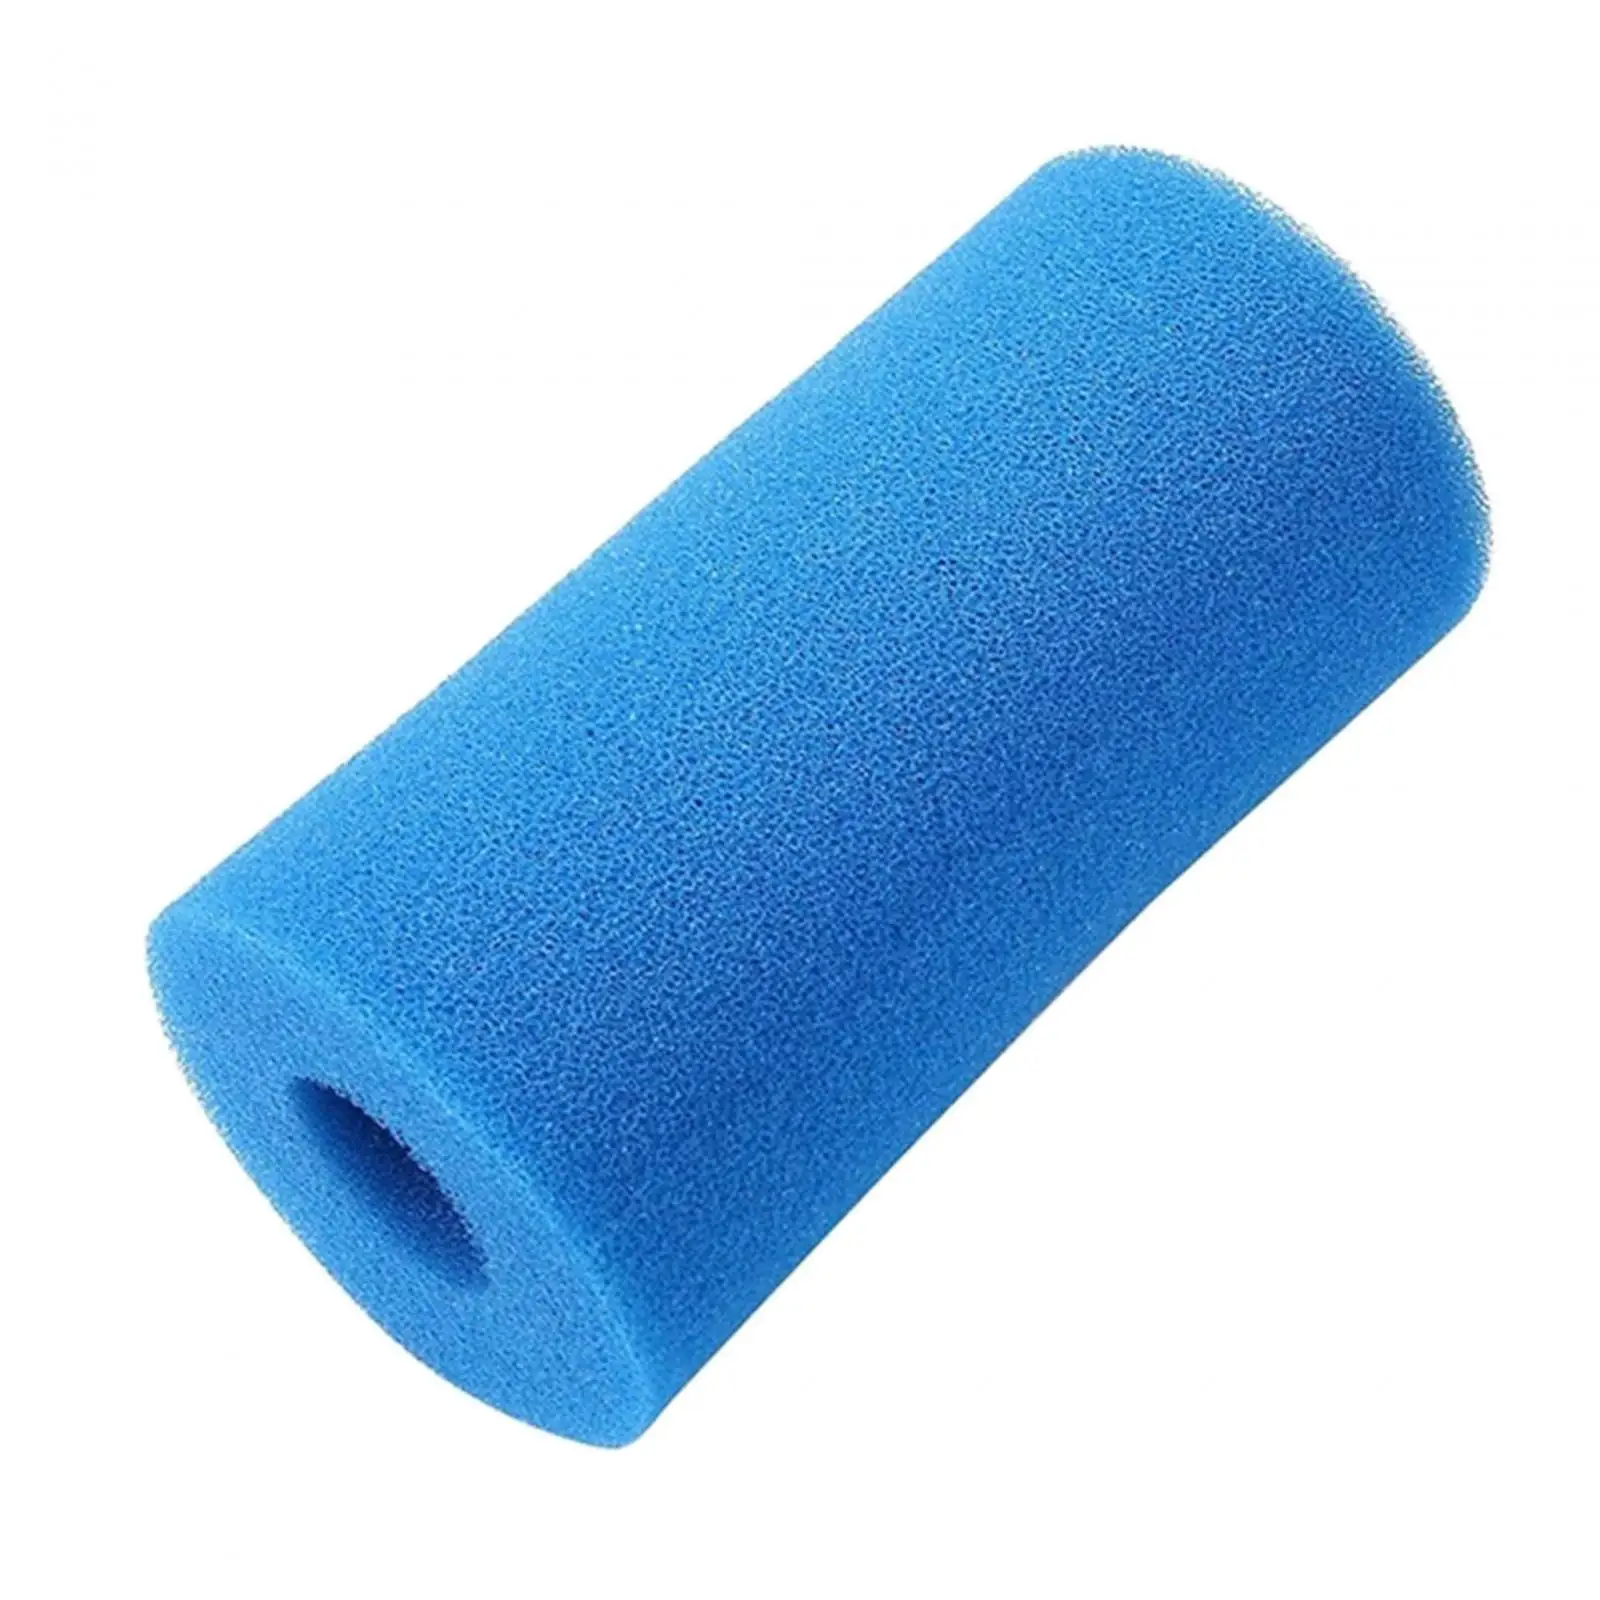 Pool Filter Cartridge, Pool Sponge Filter Easy to Use, Easy to Clean, Replace Filter Pump Cartridge for Type B Accessories